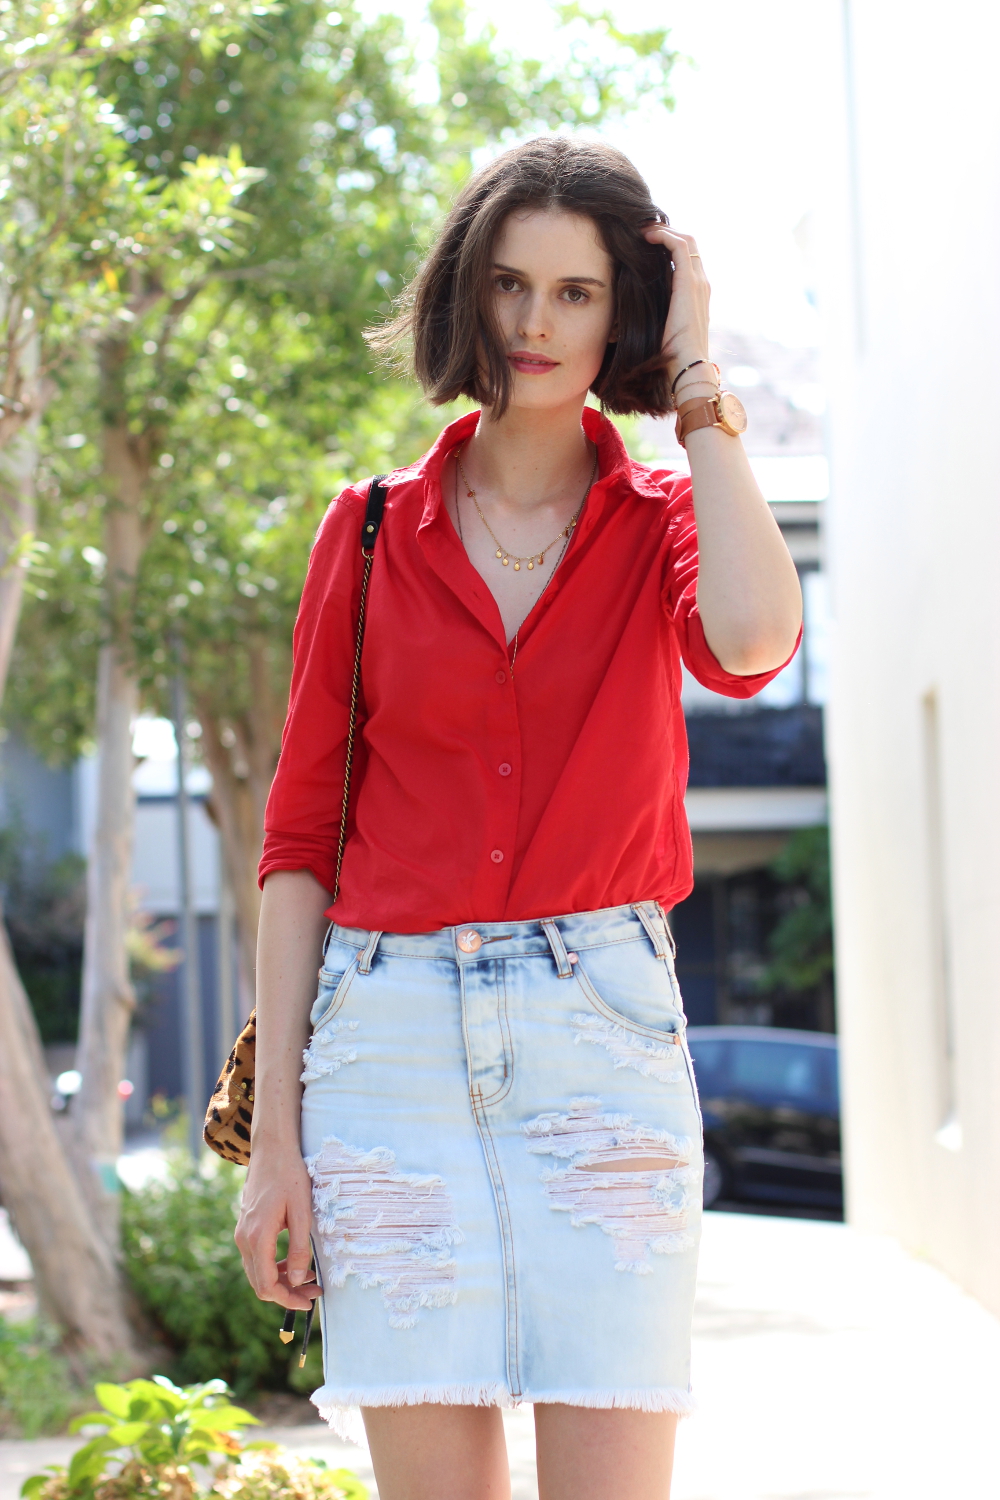 BY CHILL BLOG Ines De La fresange for uniqlo red shirt and one teaspoon ripped denim skirt